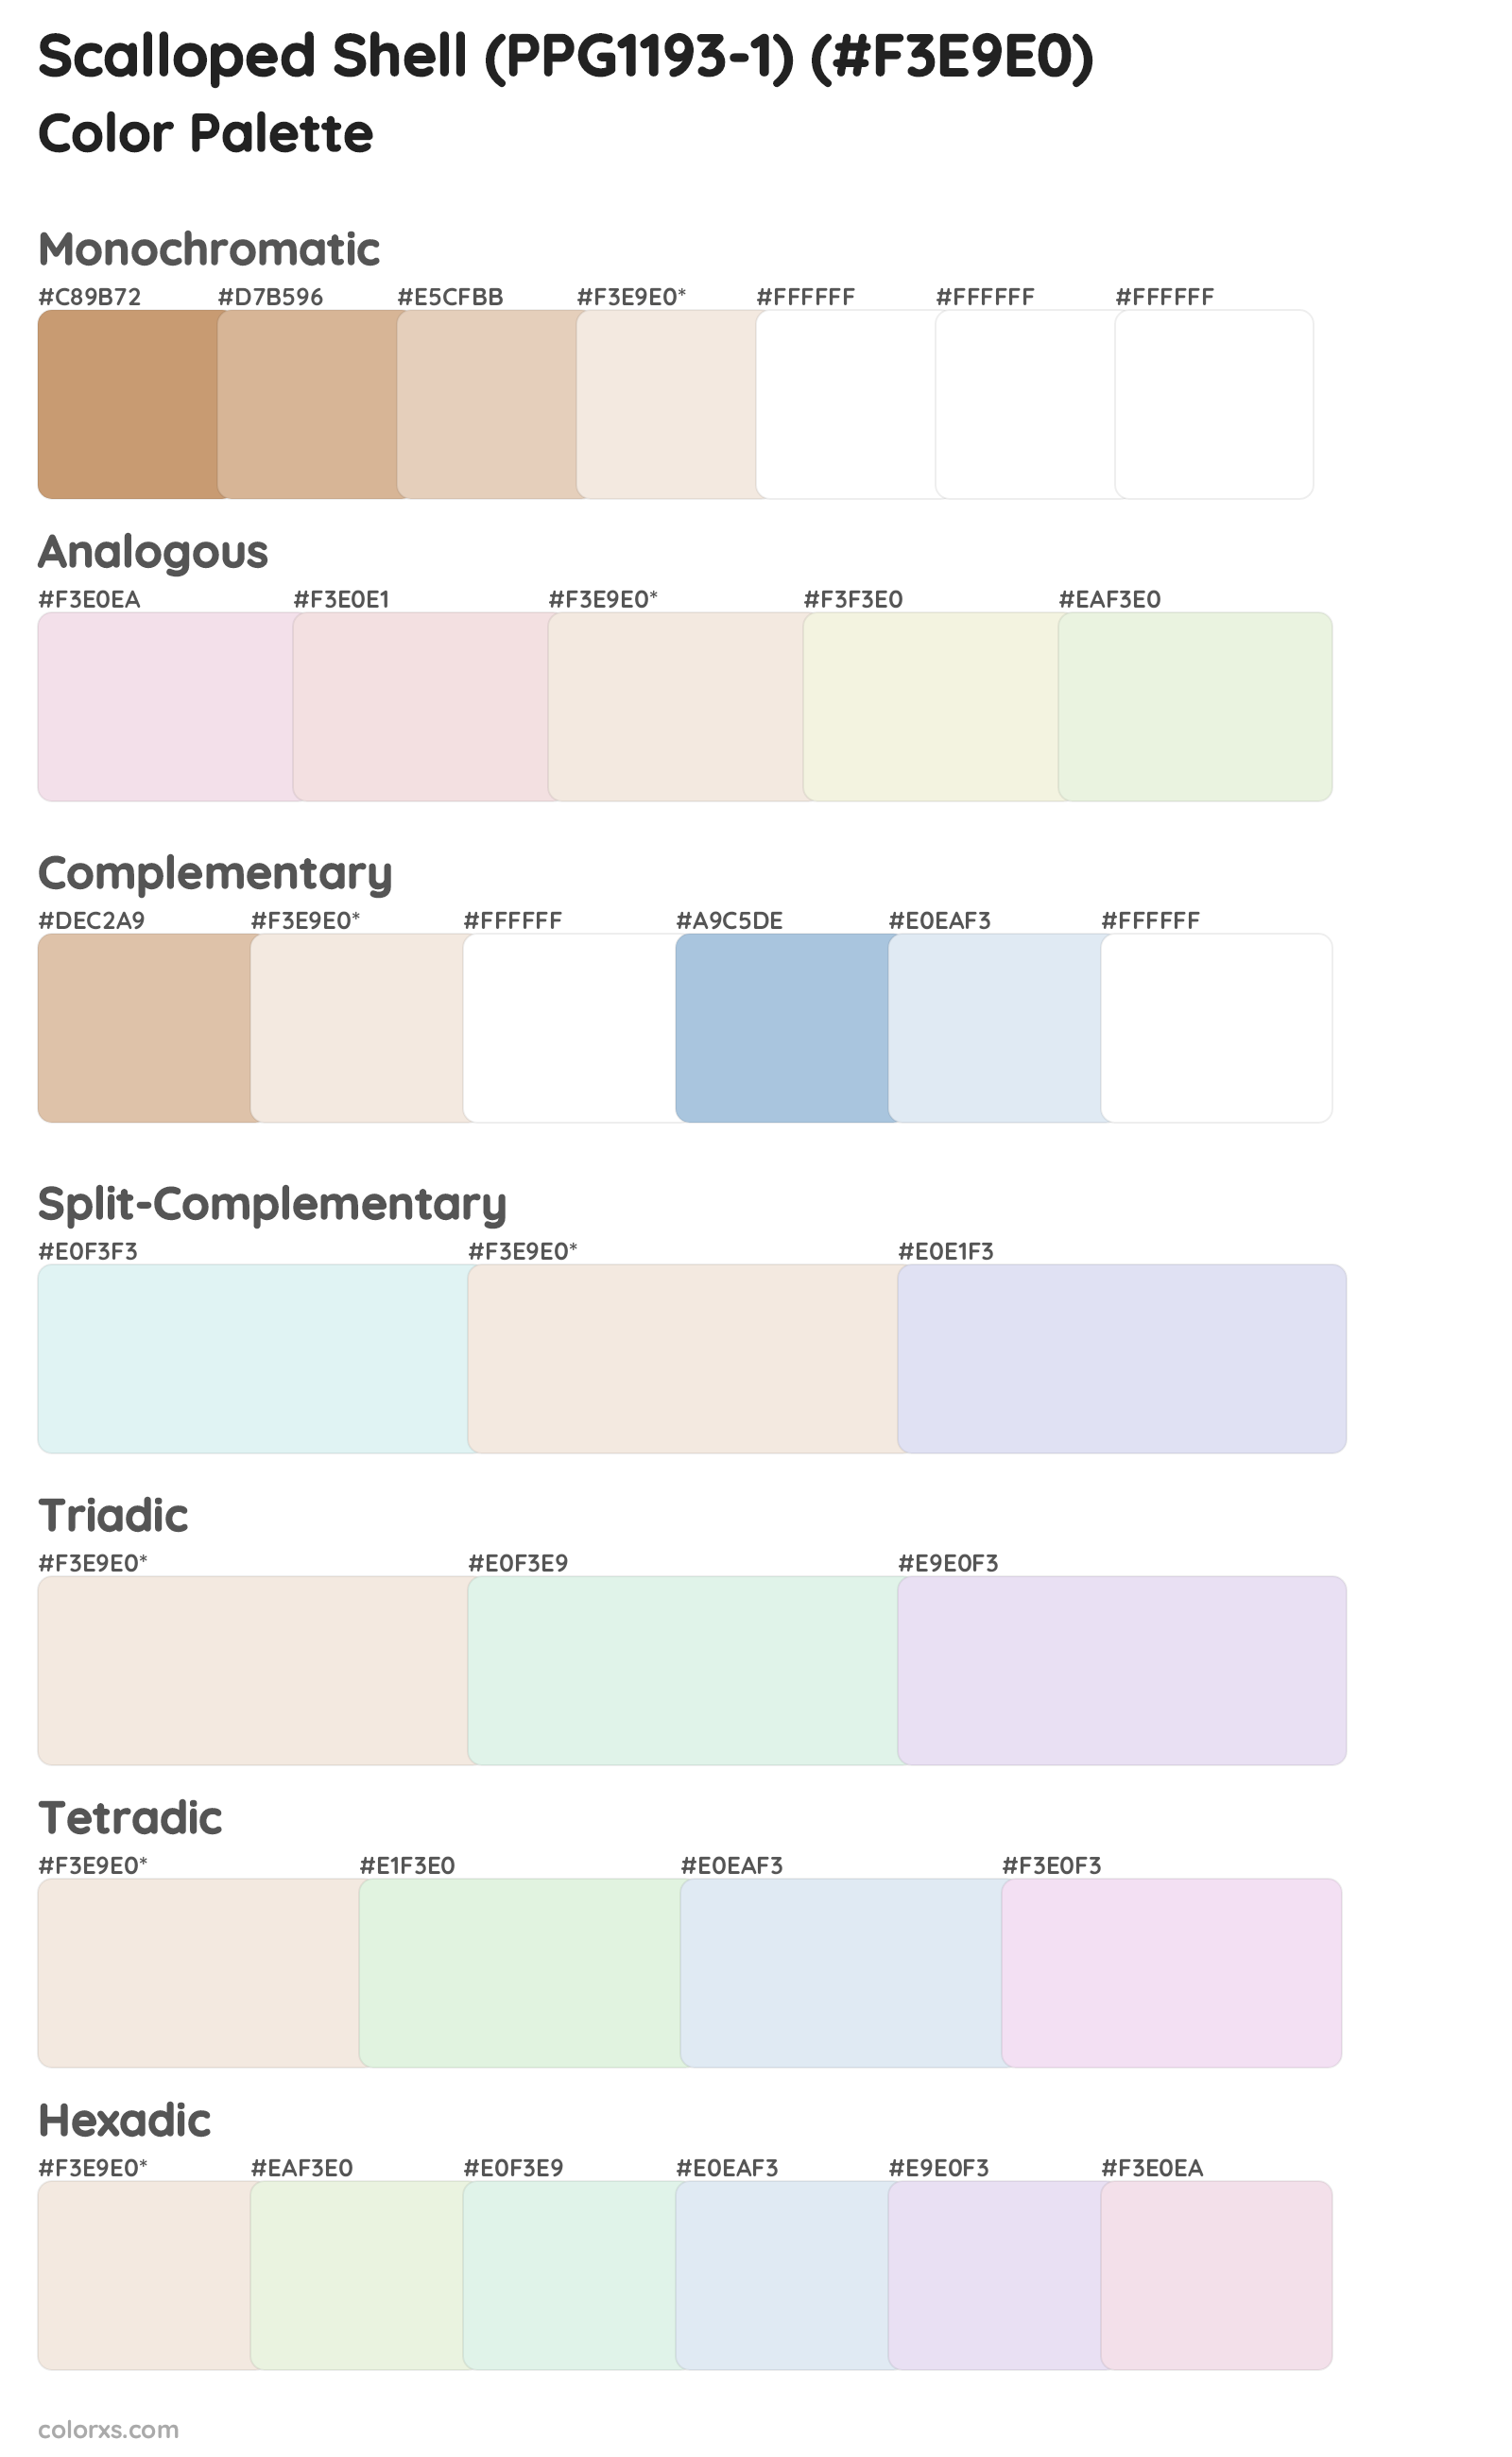 Scalloped Shell (PPG1193-1) Color Scheme Palettes